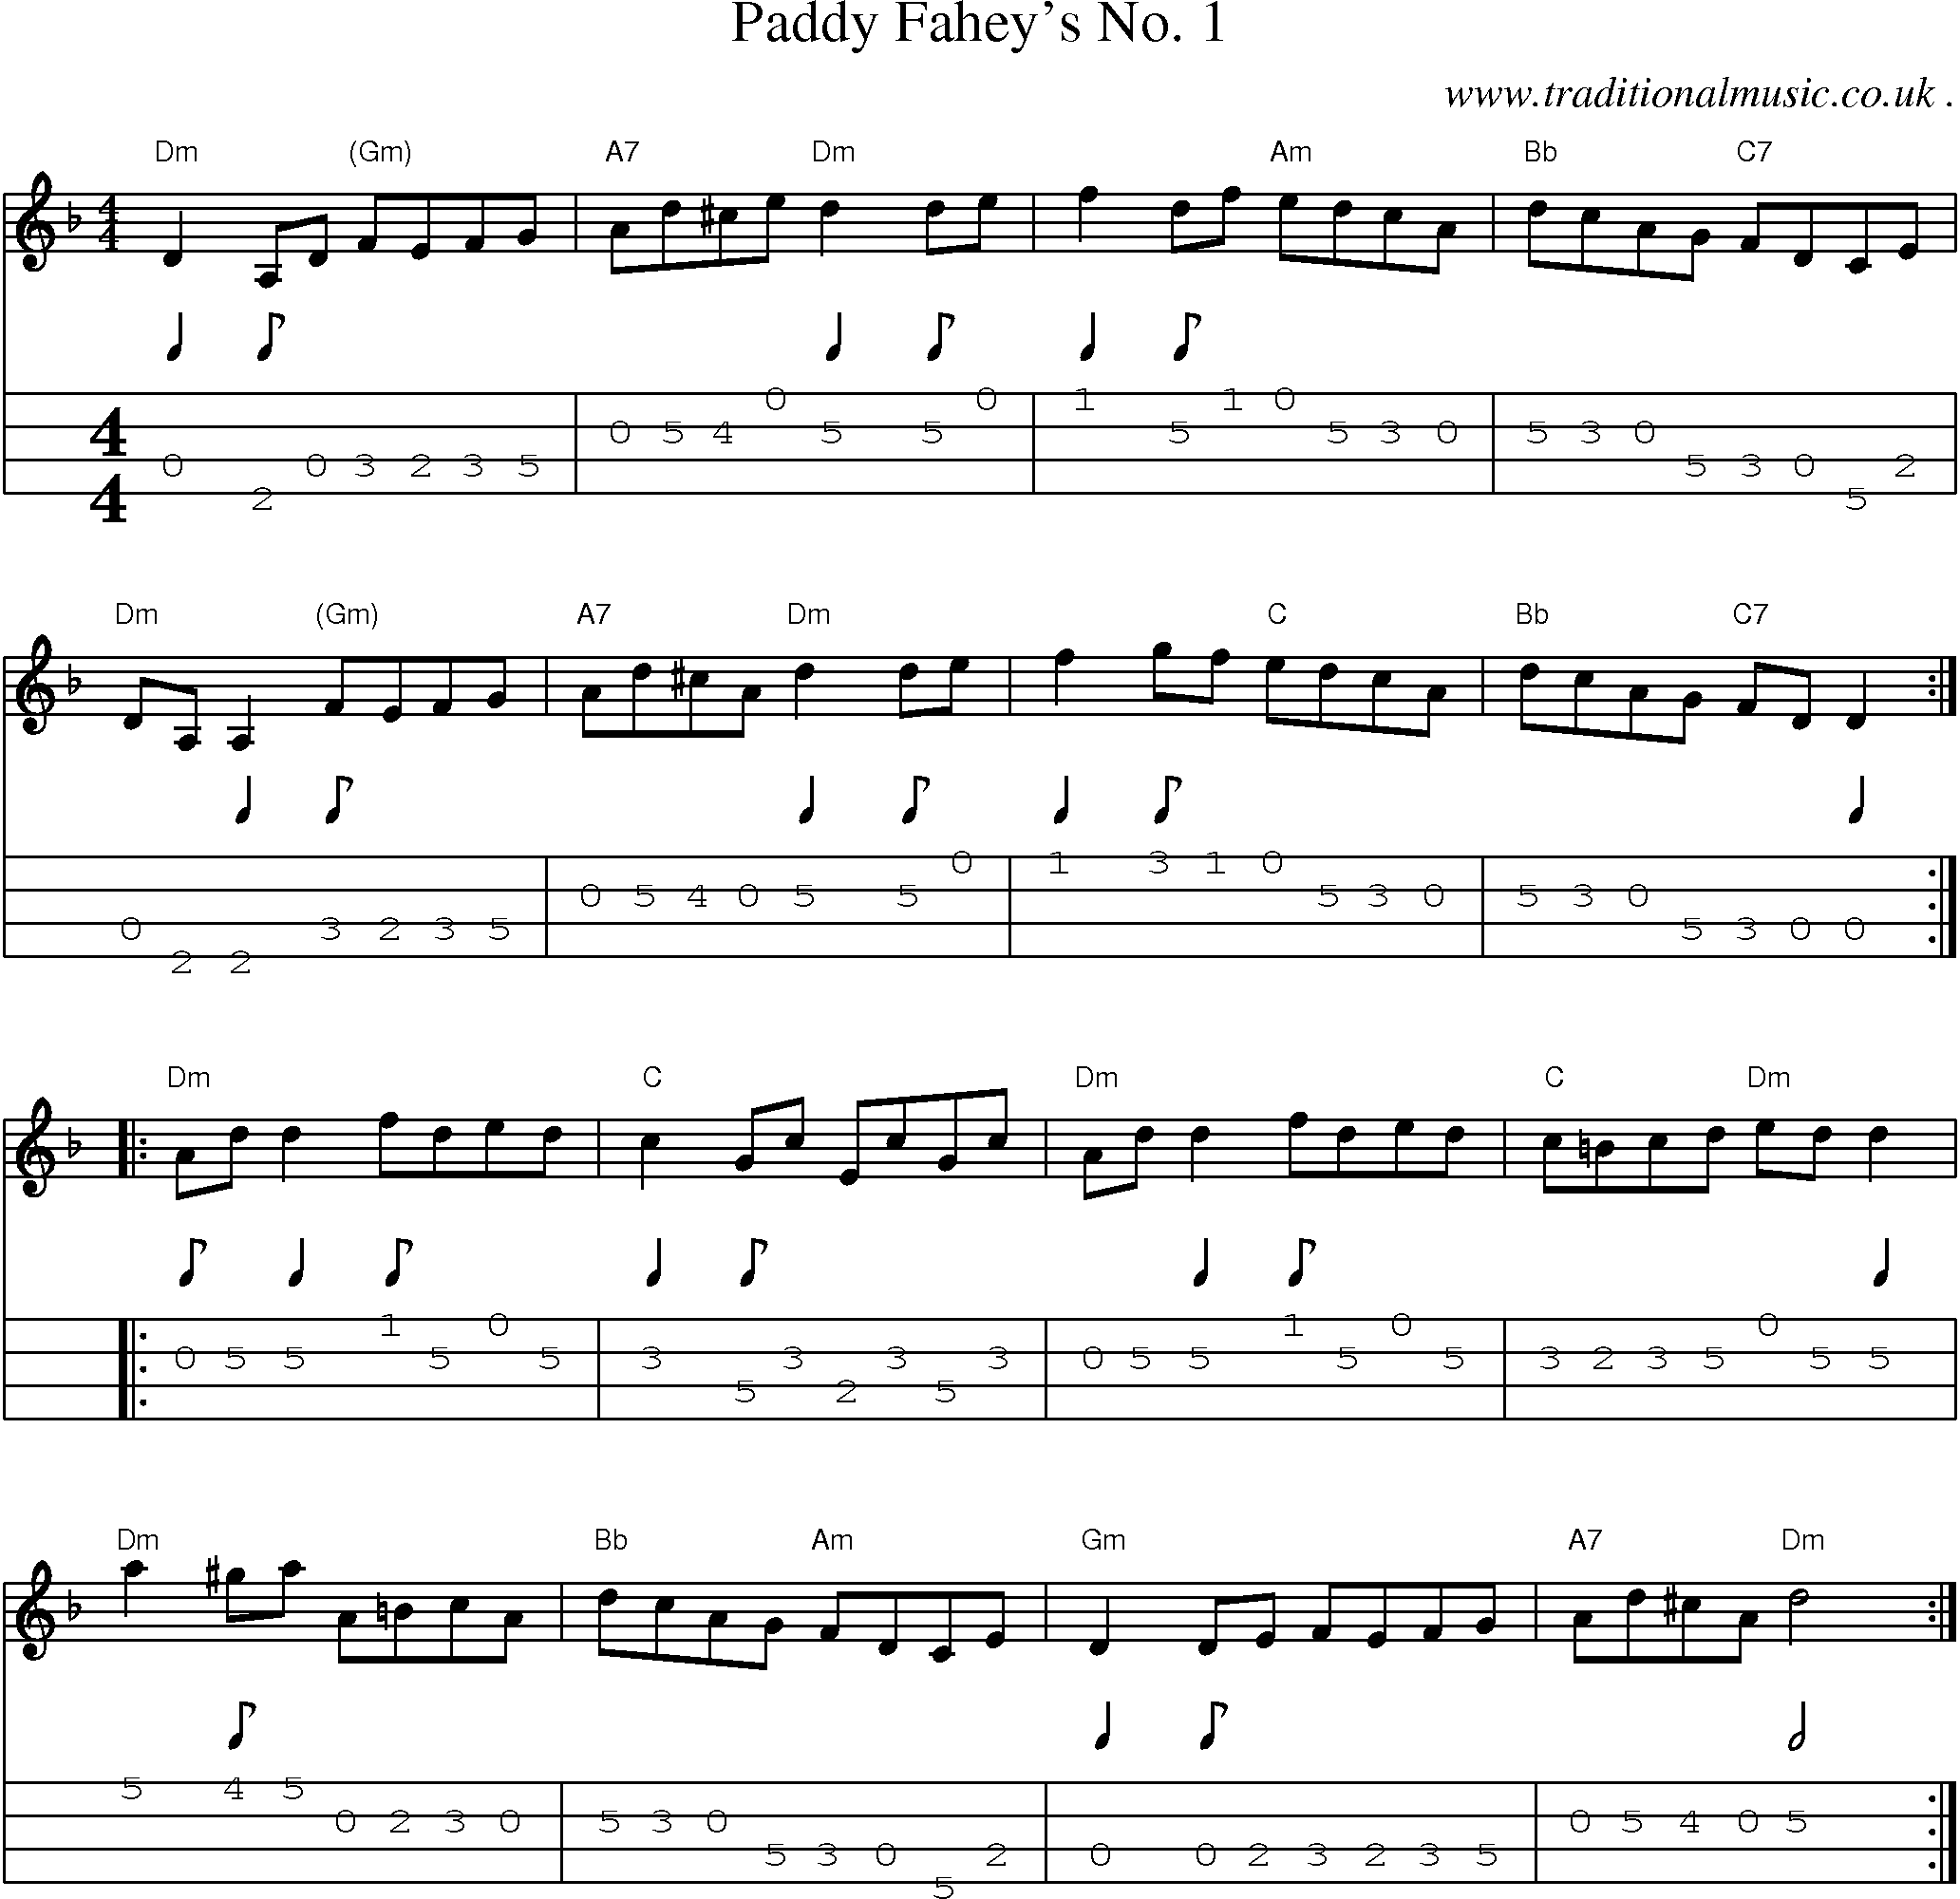 Music Score and Guitar Tabs for Paddy Faheys No 1